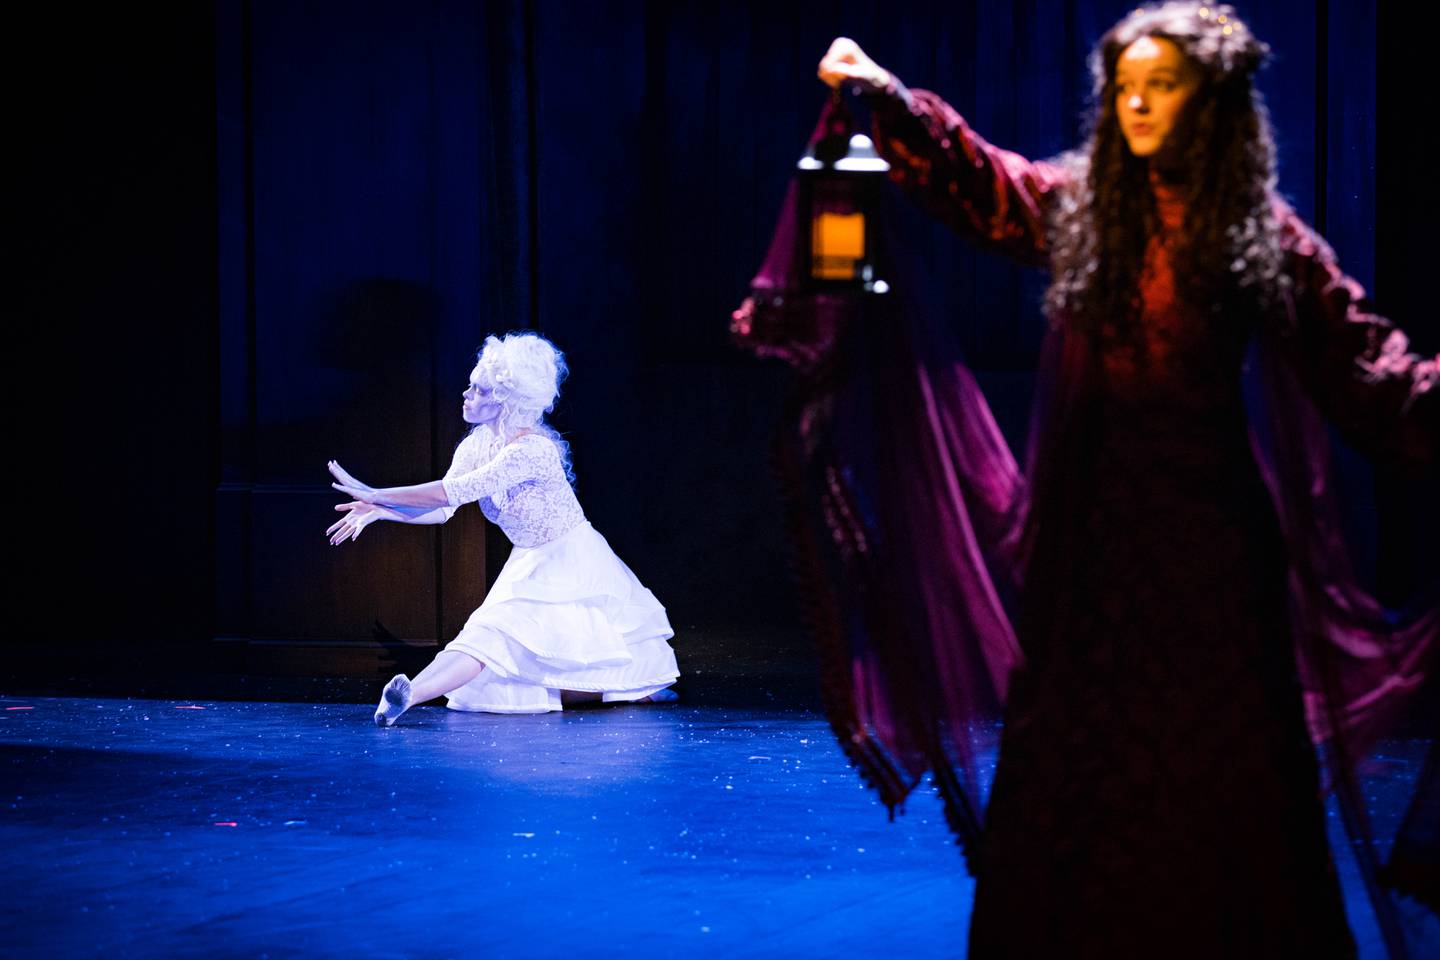 The actor next to the dancer portraying Winter in the photo is Zoya Martin as the Ghost of Christmas Past. Metropolis Arlington Heights 2023